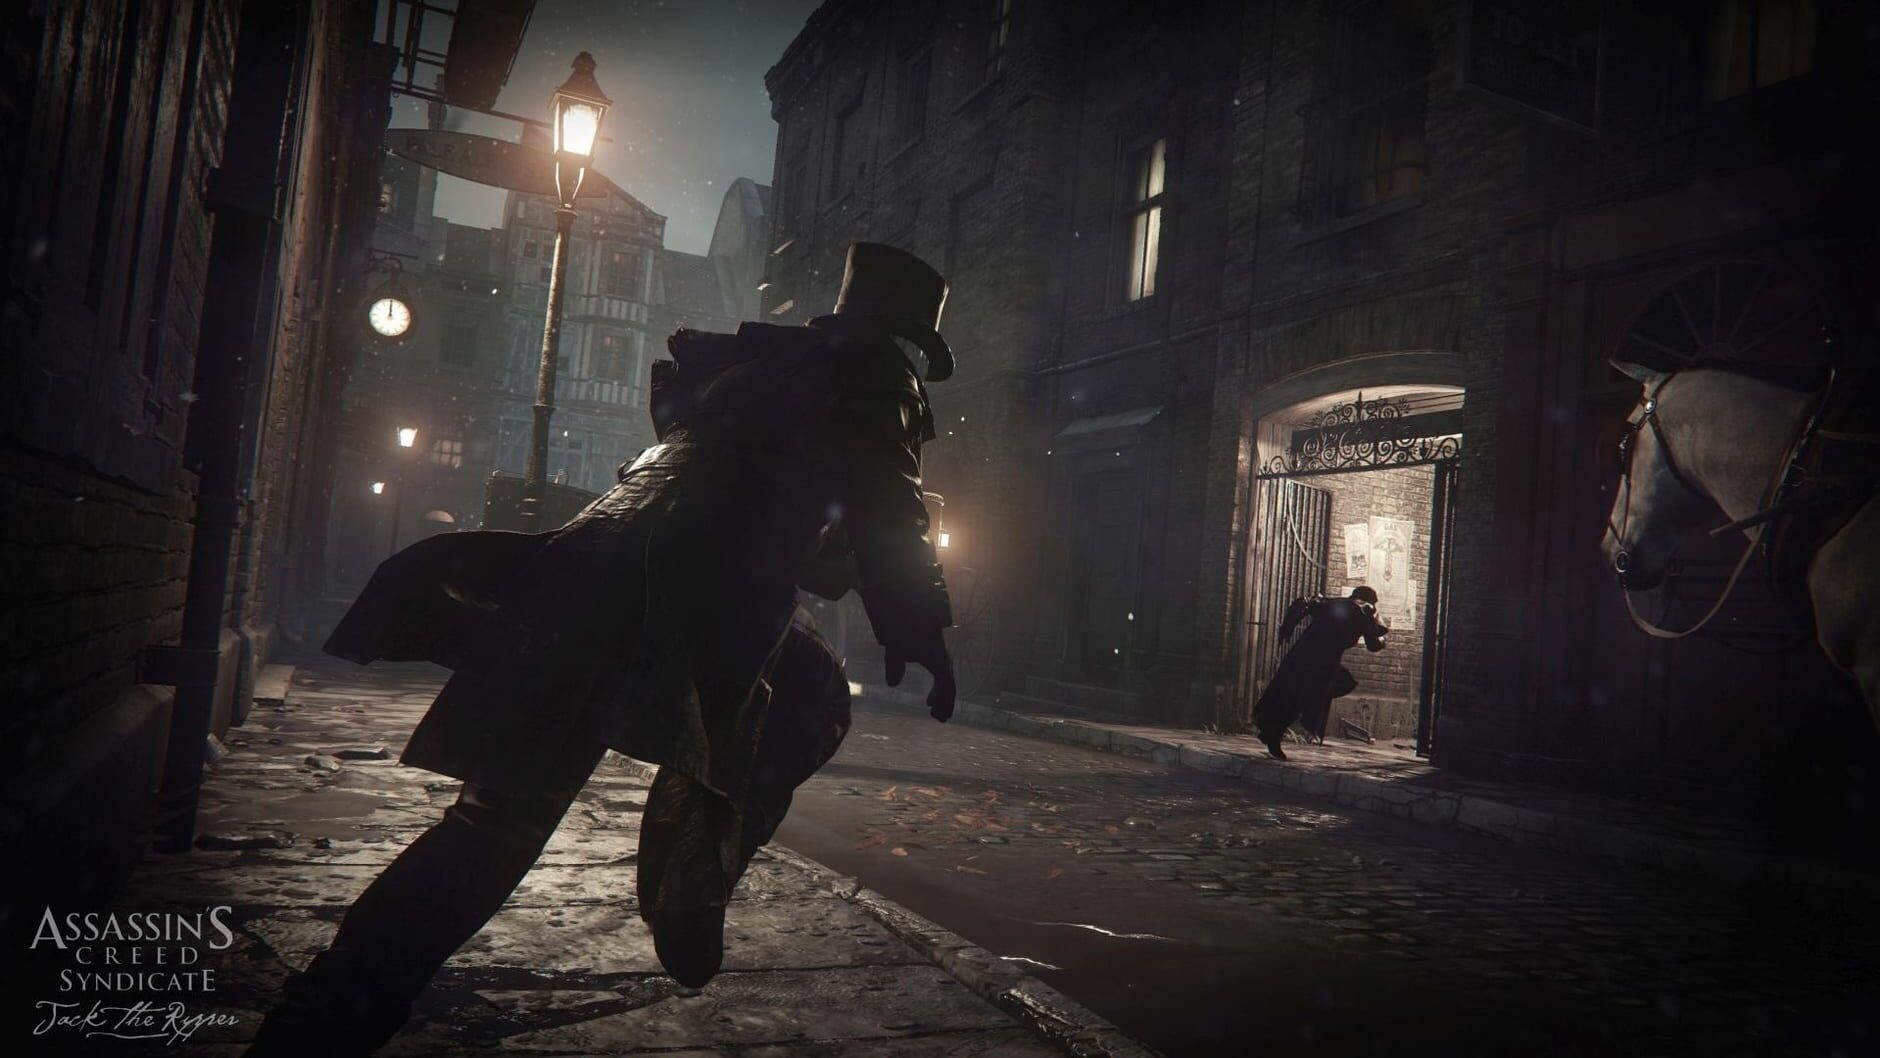 Screenshot for Assassin's Creed Syndicate: Jack the Ripper